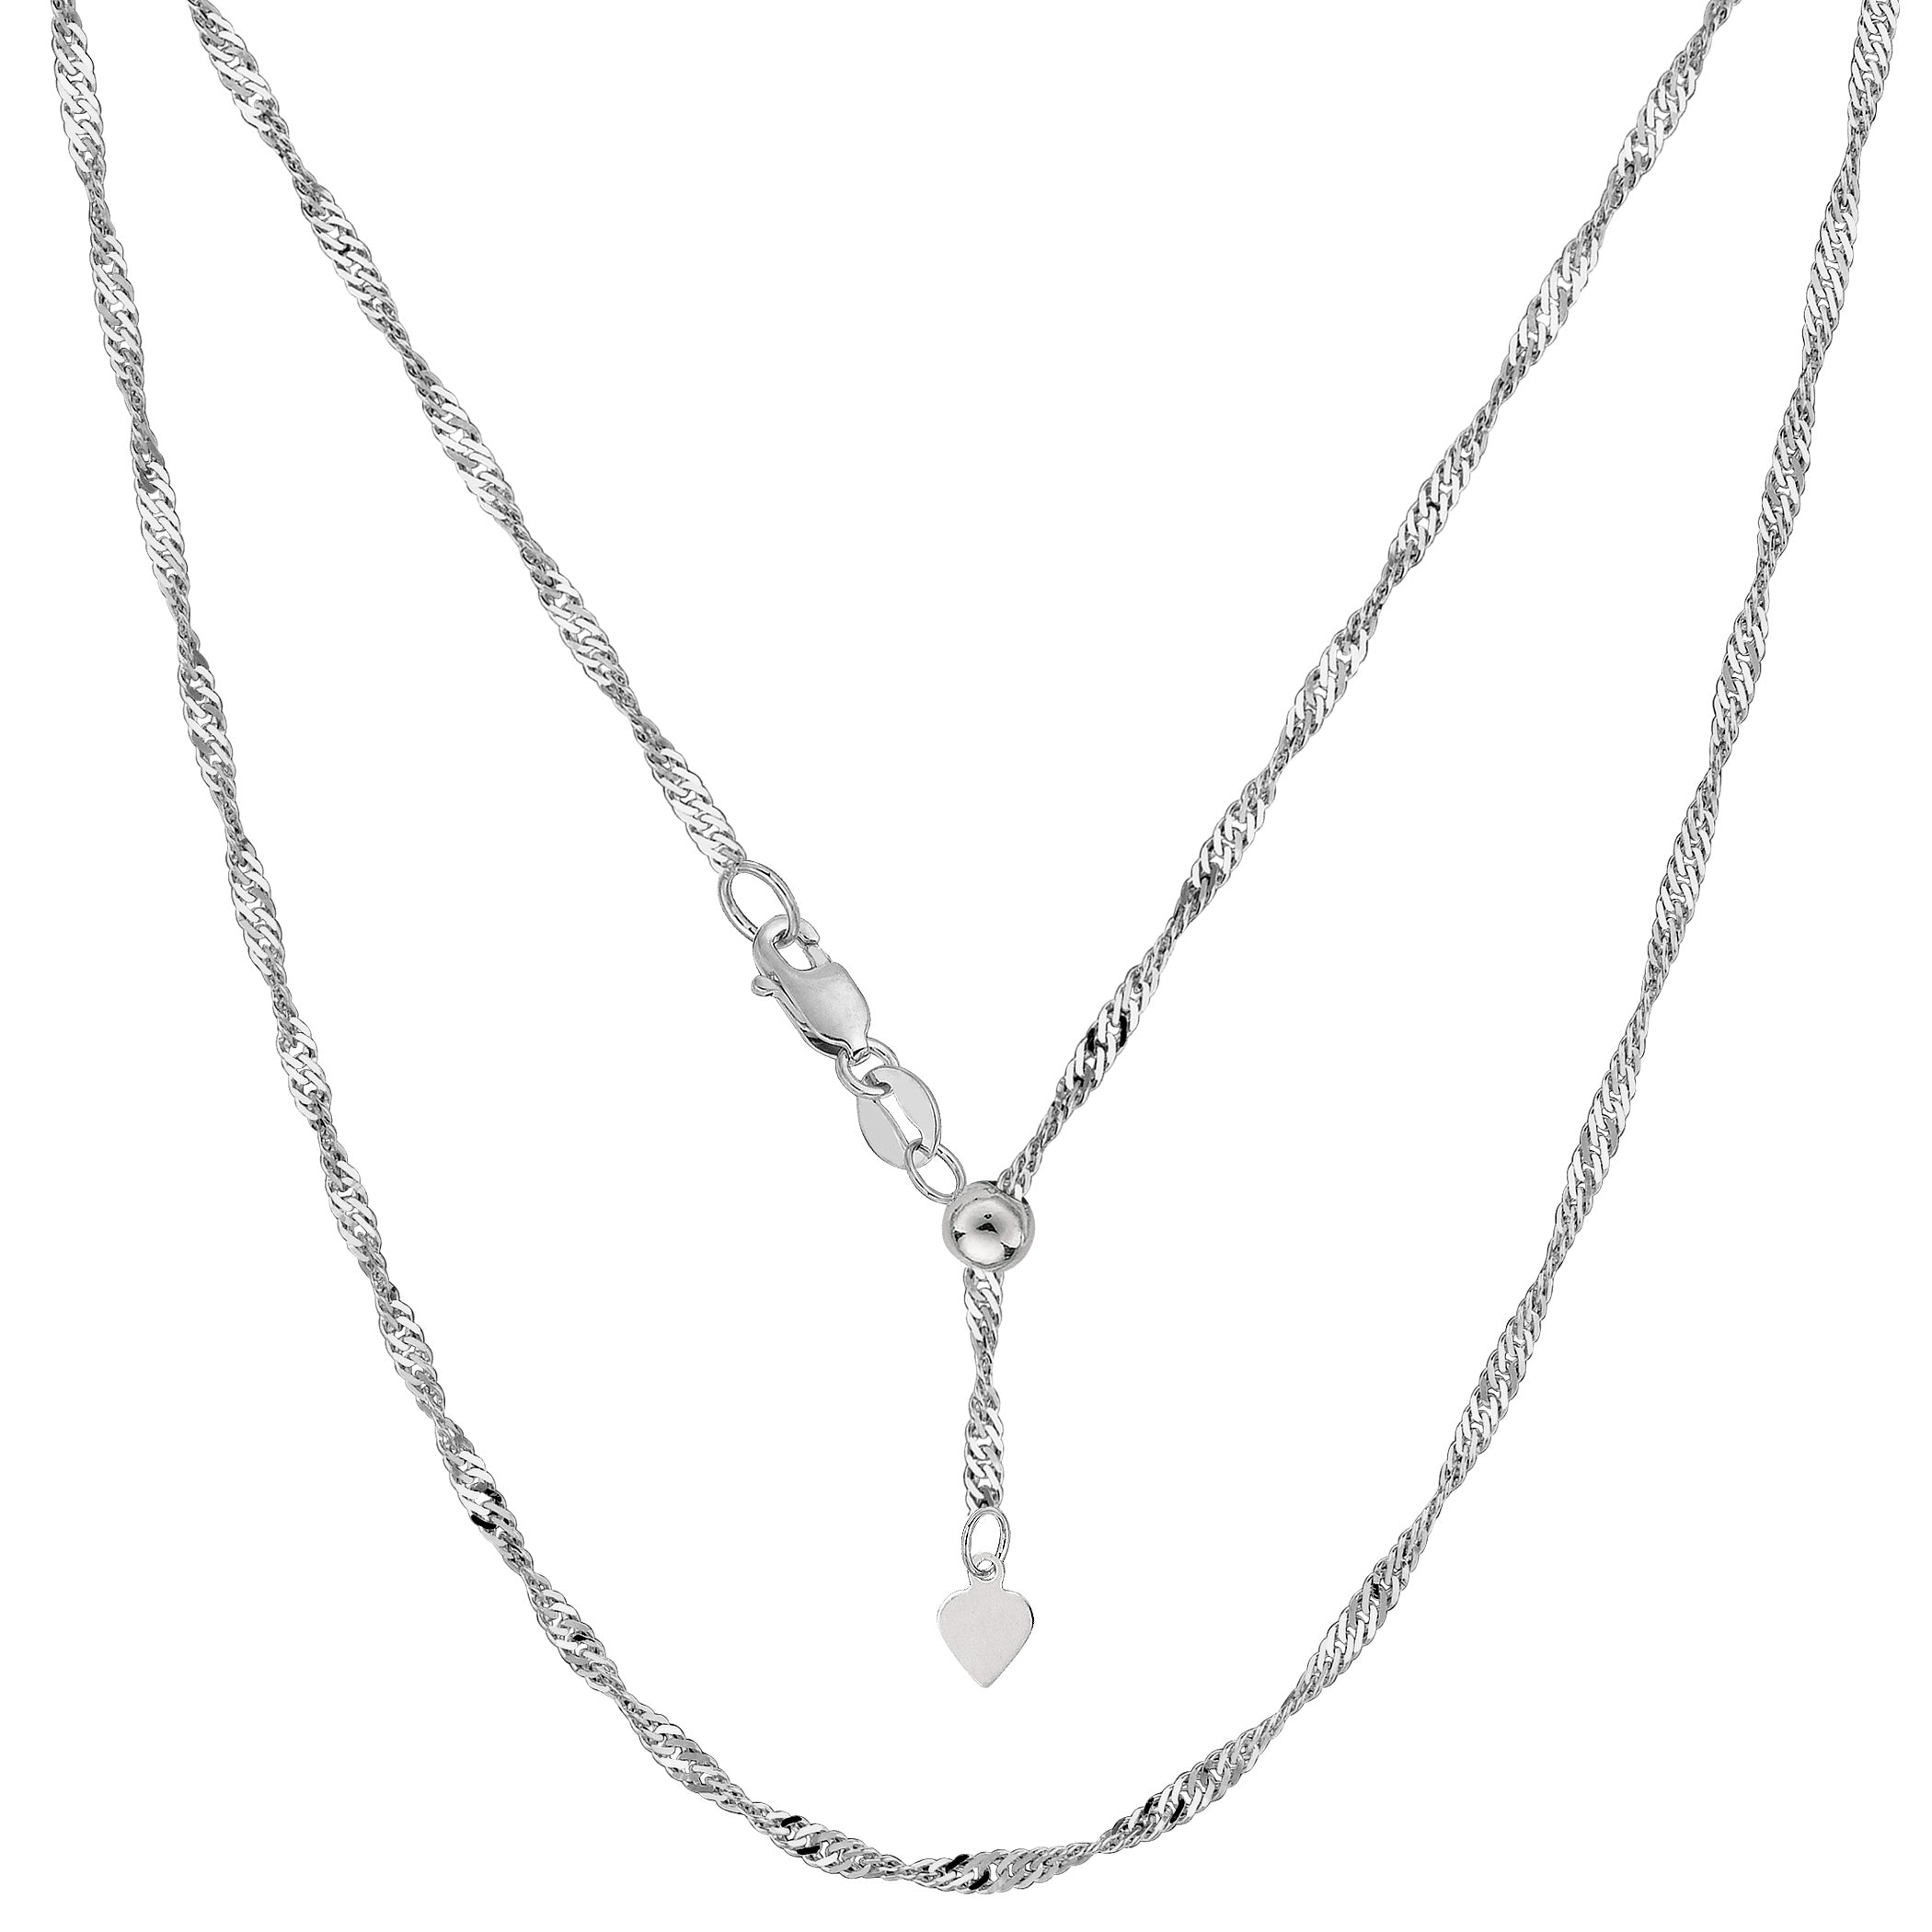 14k White Gold Adjustable Singapore Link Chain Necklace, 1.15mm, 22" fine designer jewelry for men and women